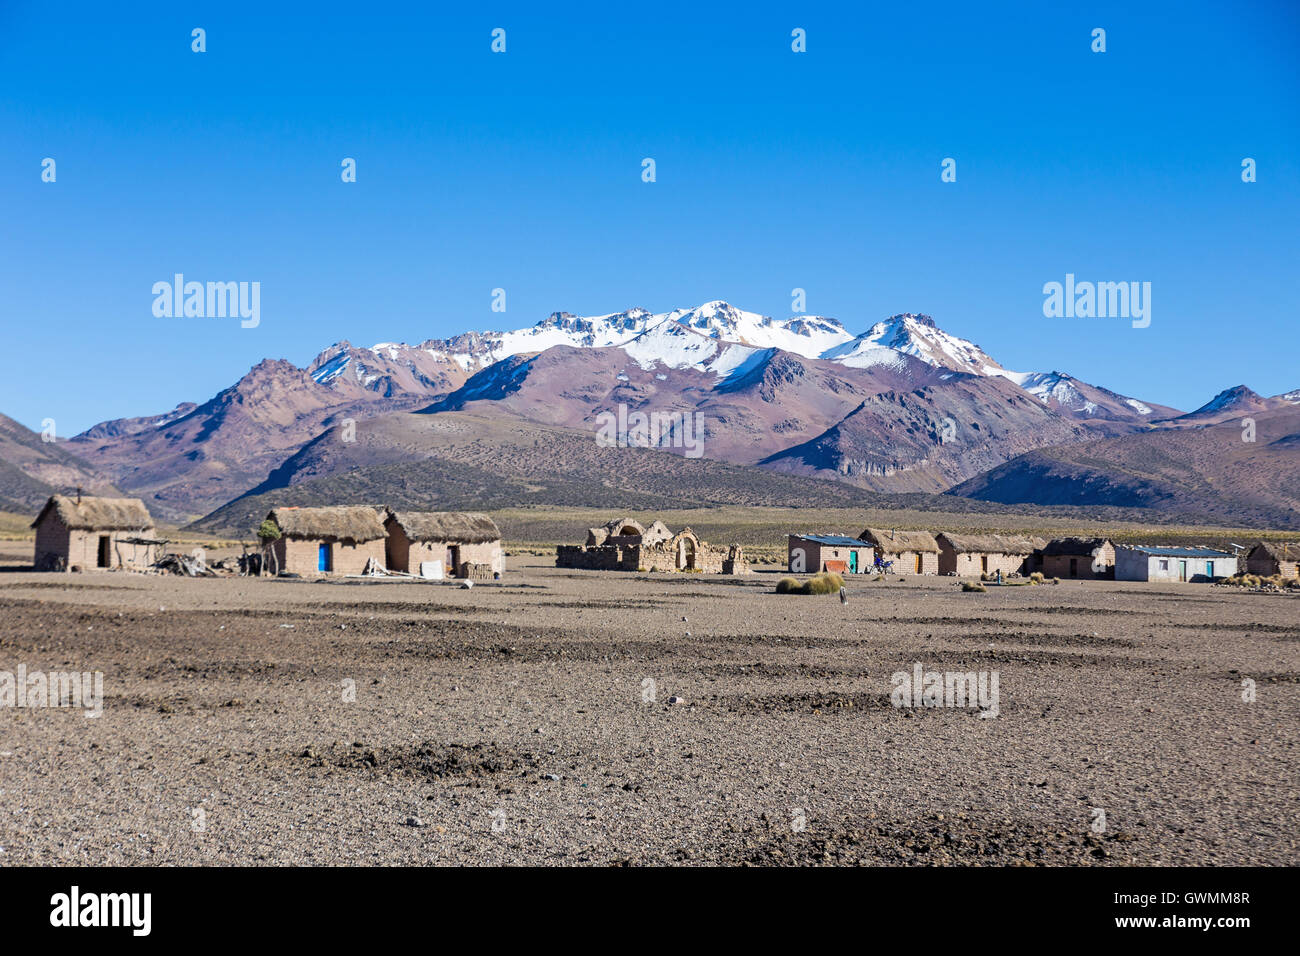 Small village of shepherds of llamas in the Andean mountains. High Andean tundra landscape in the mountains of the Andes. The we Stock Photo